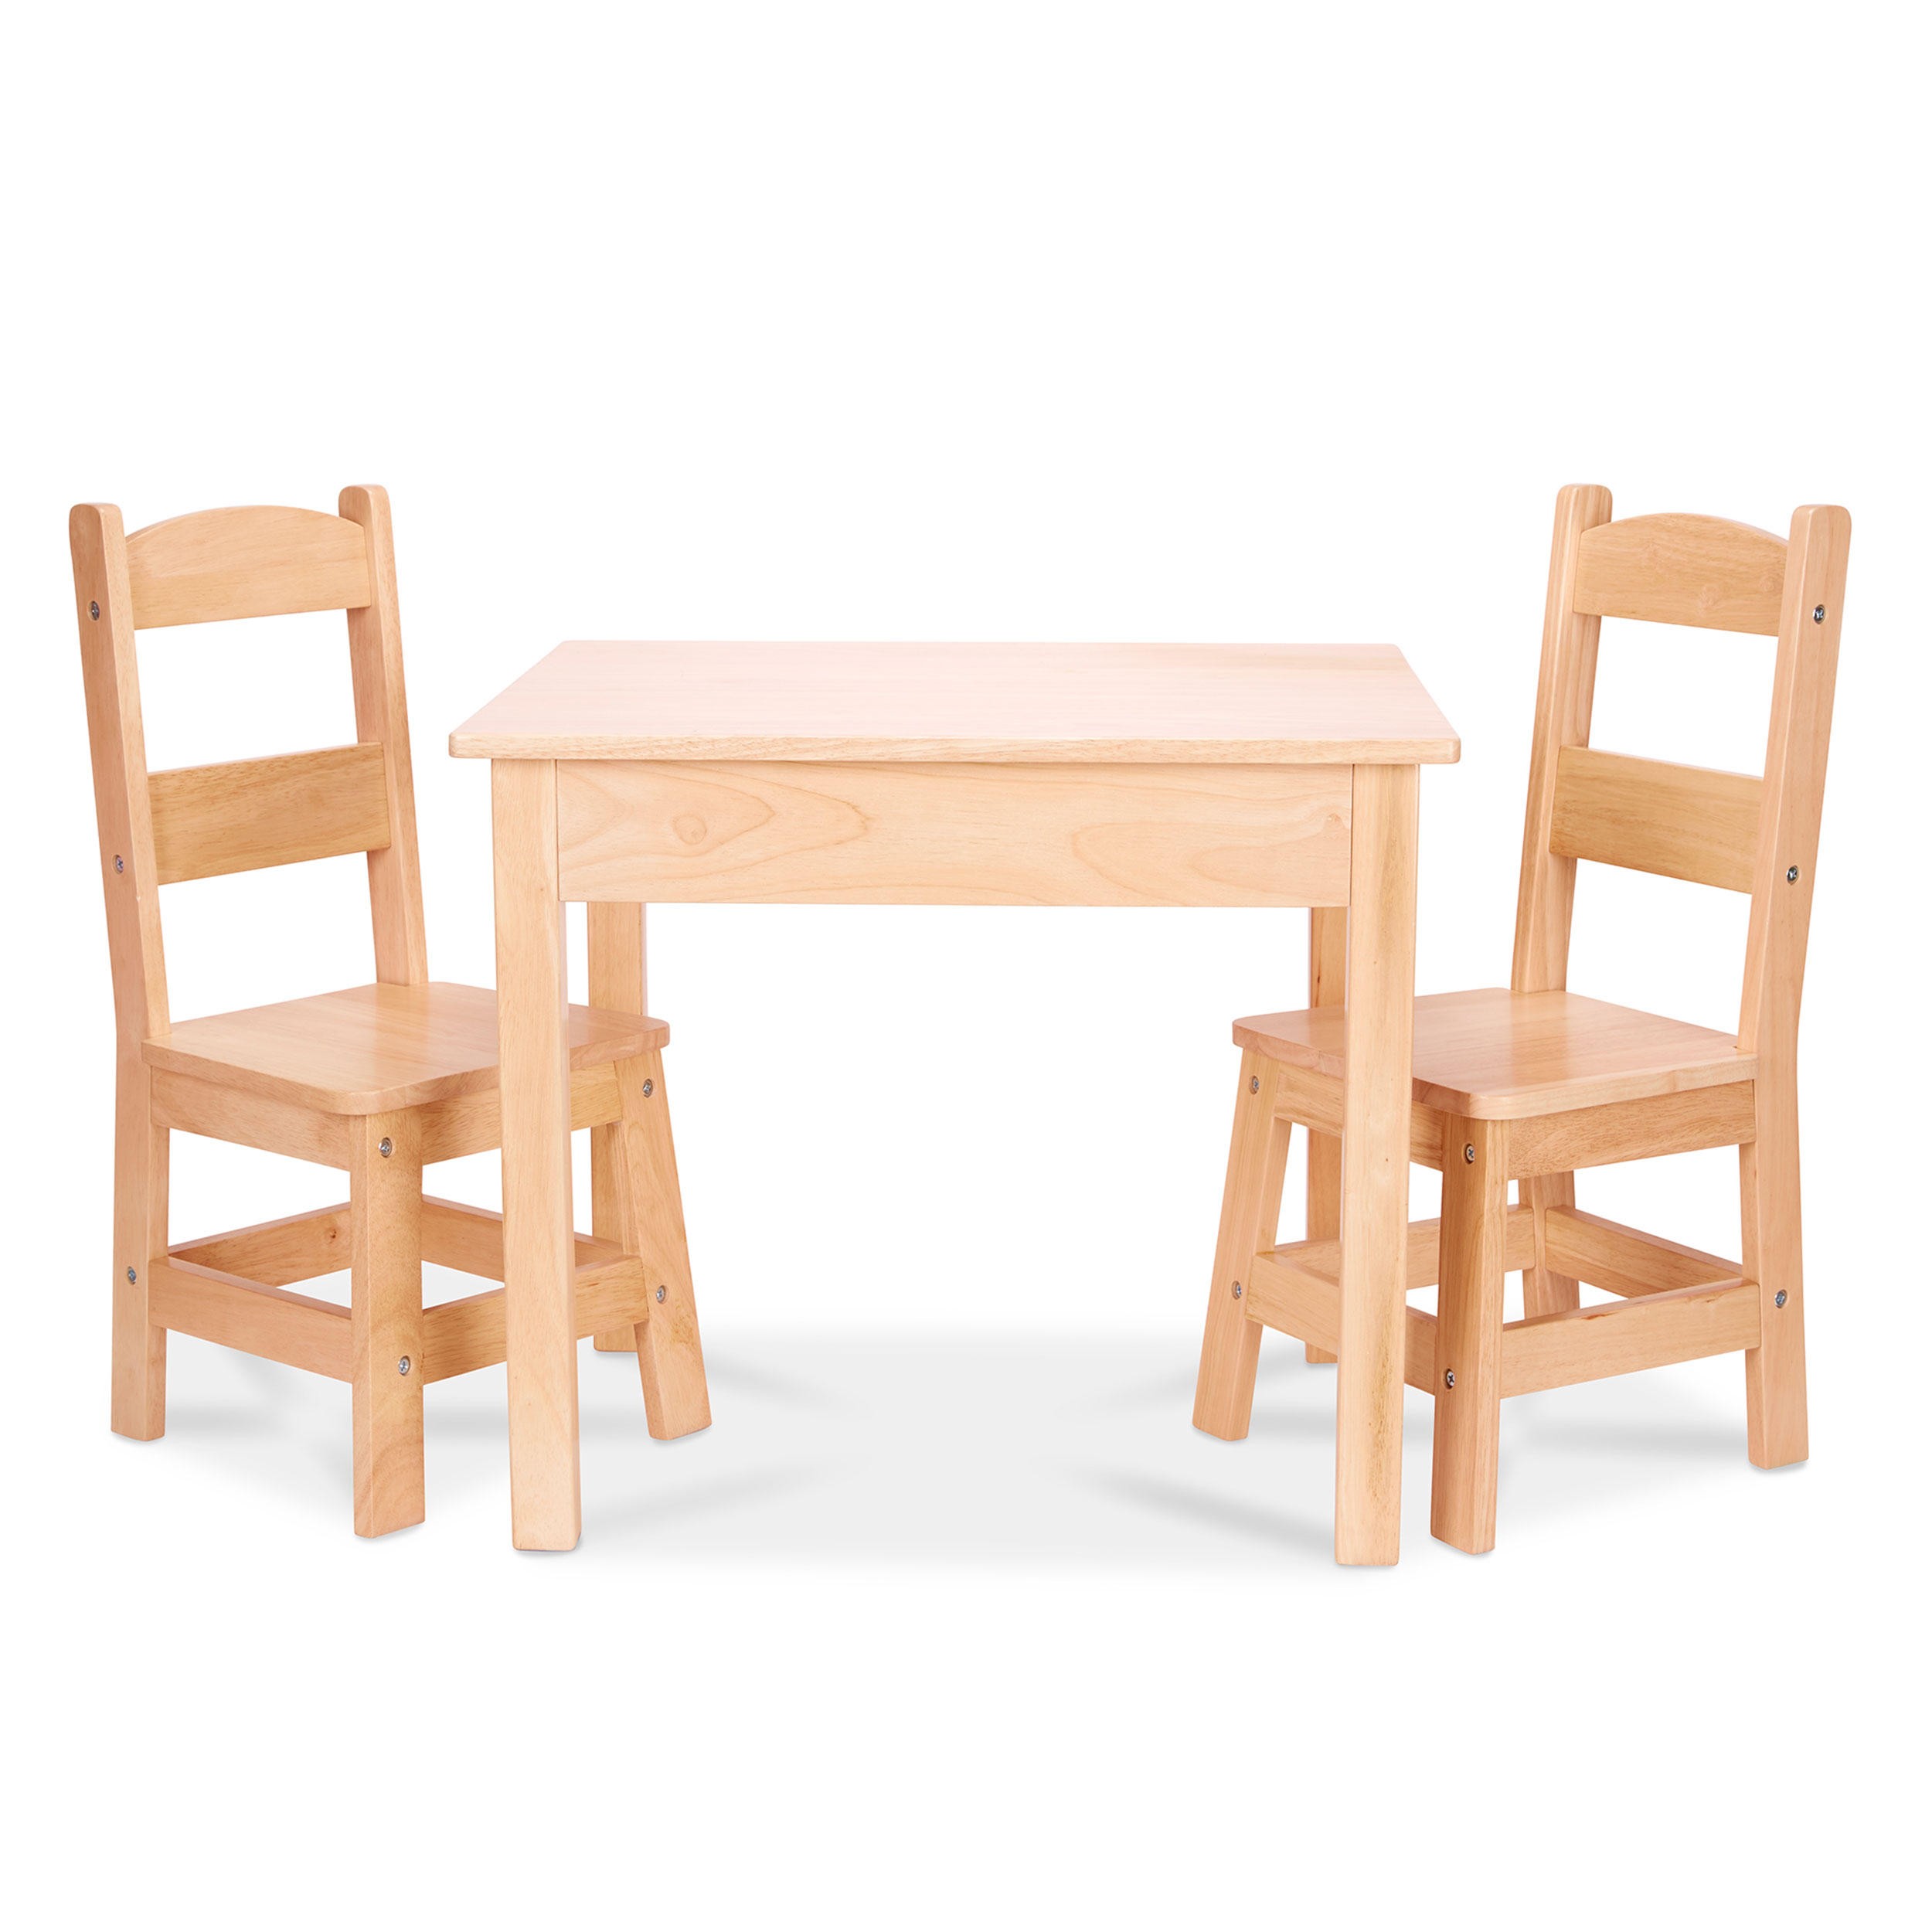 Wooden Table & Chairs, Natural